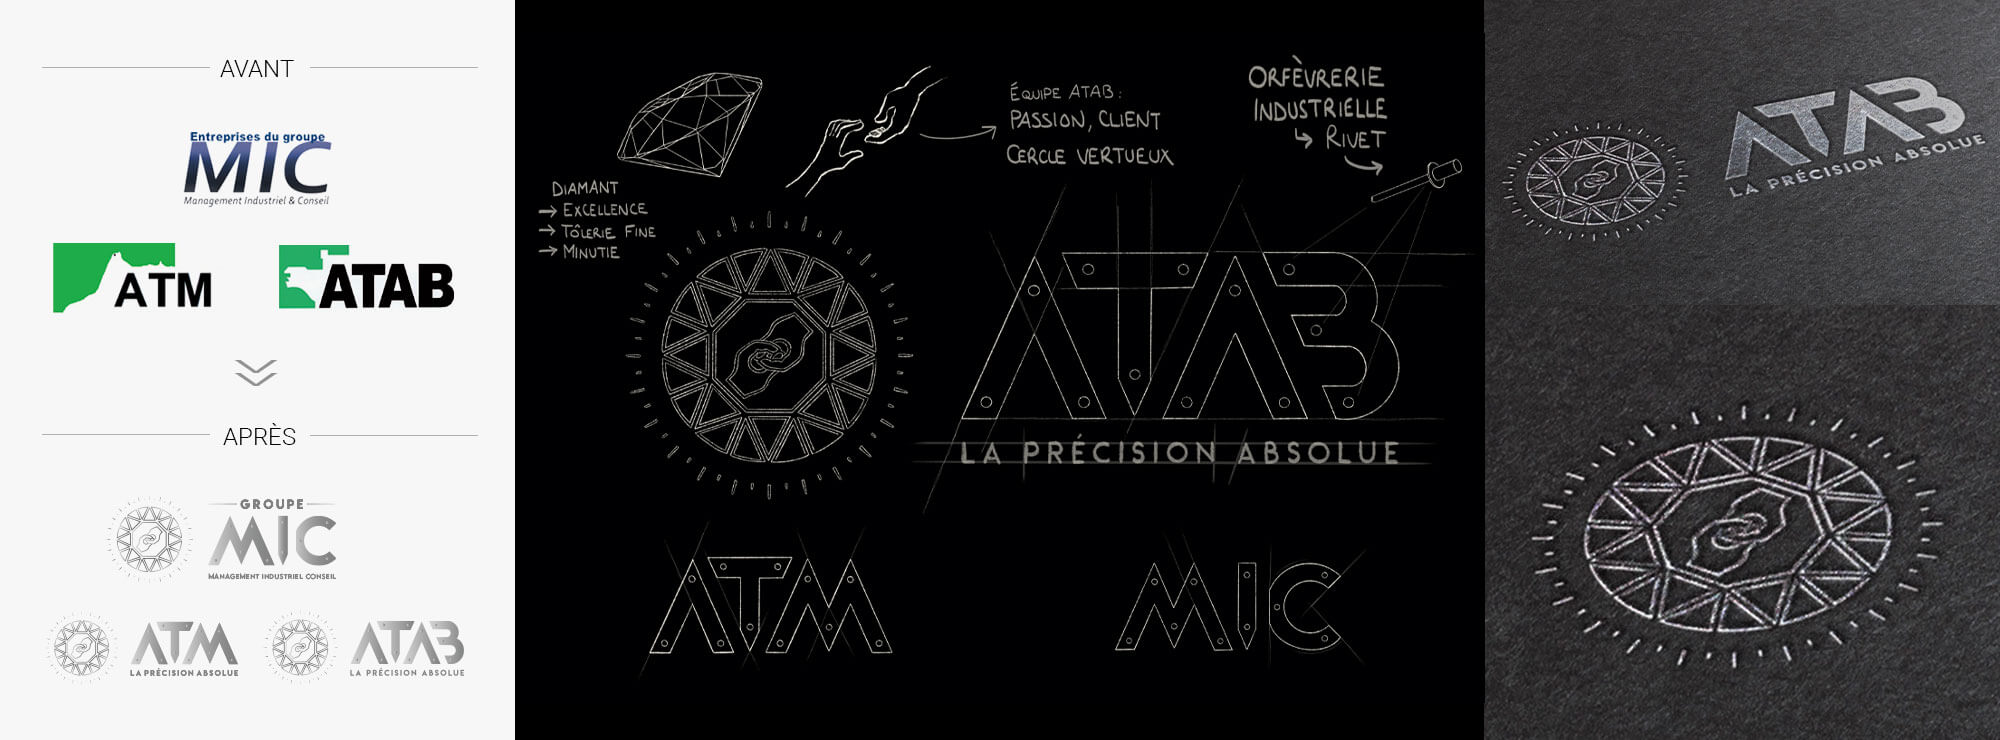 ATAB - a site cut with precision